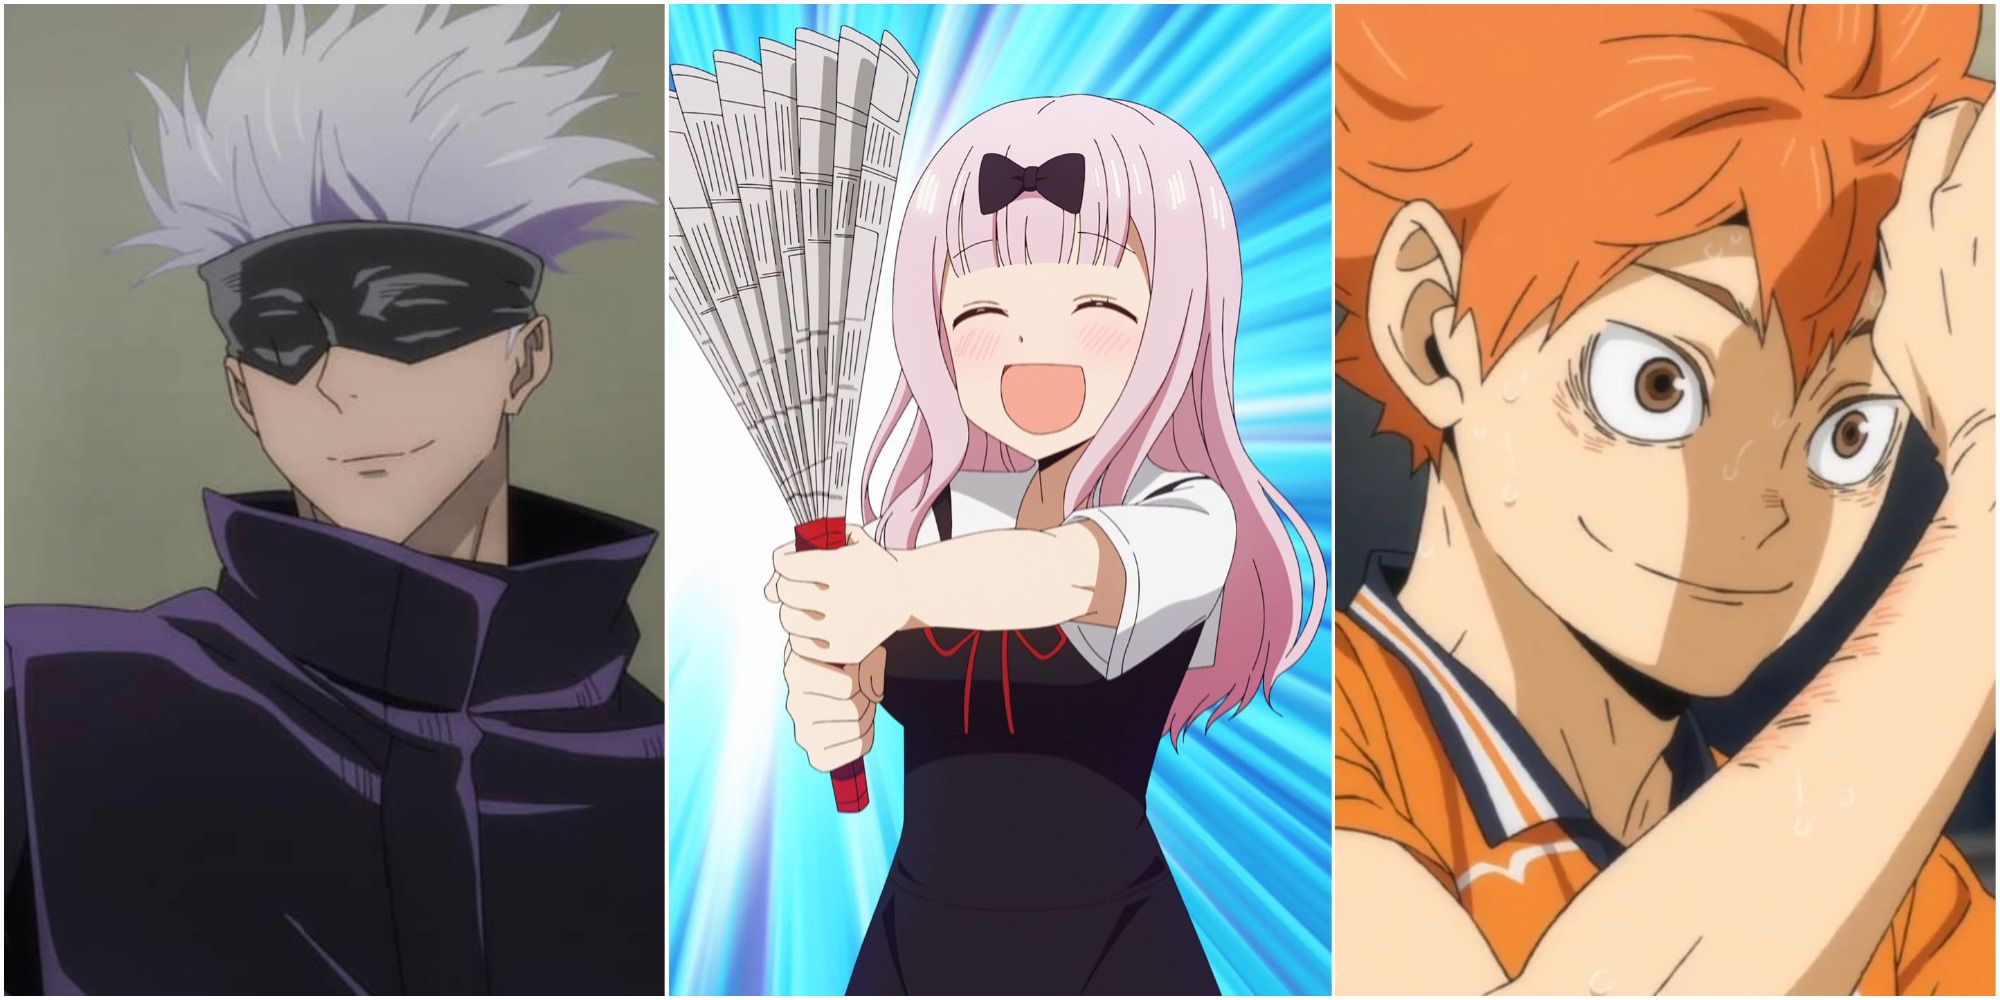 10 Most Popular Anime Characters Of 2020 (According To ...